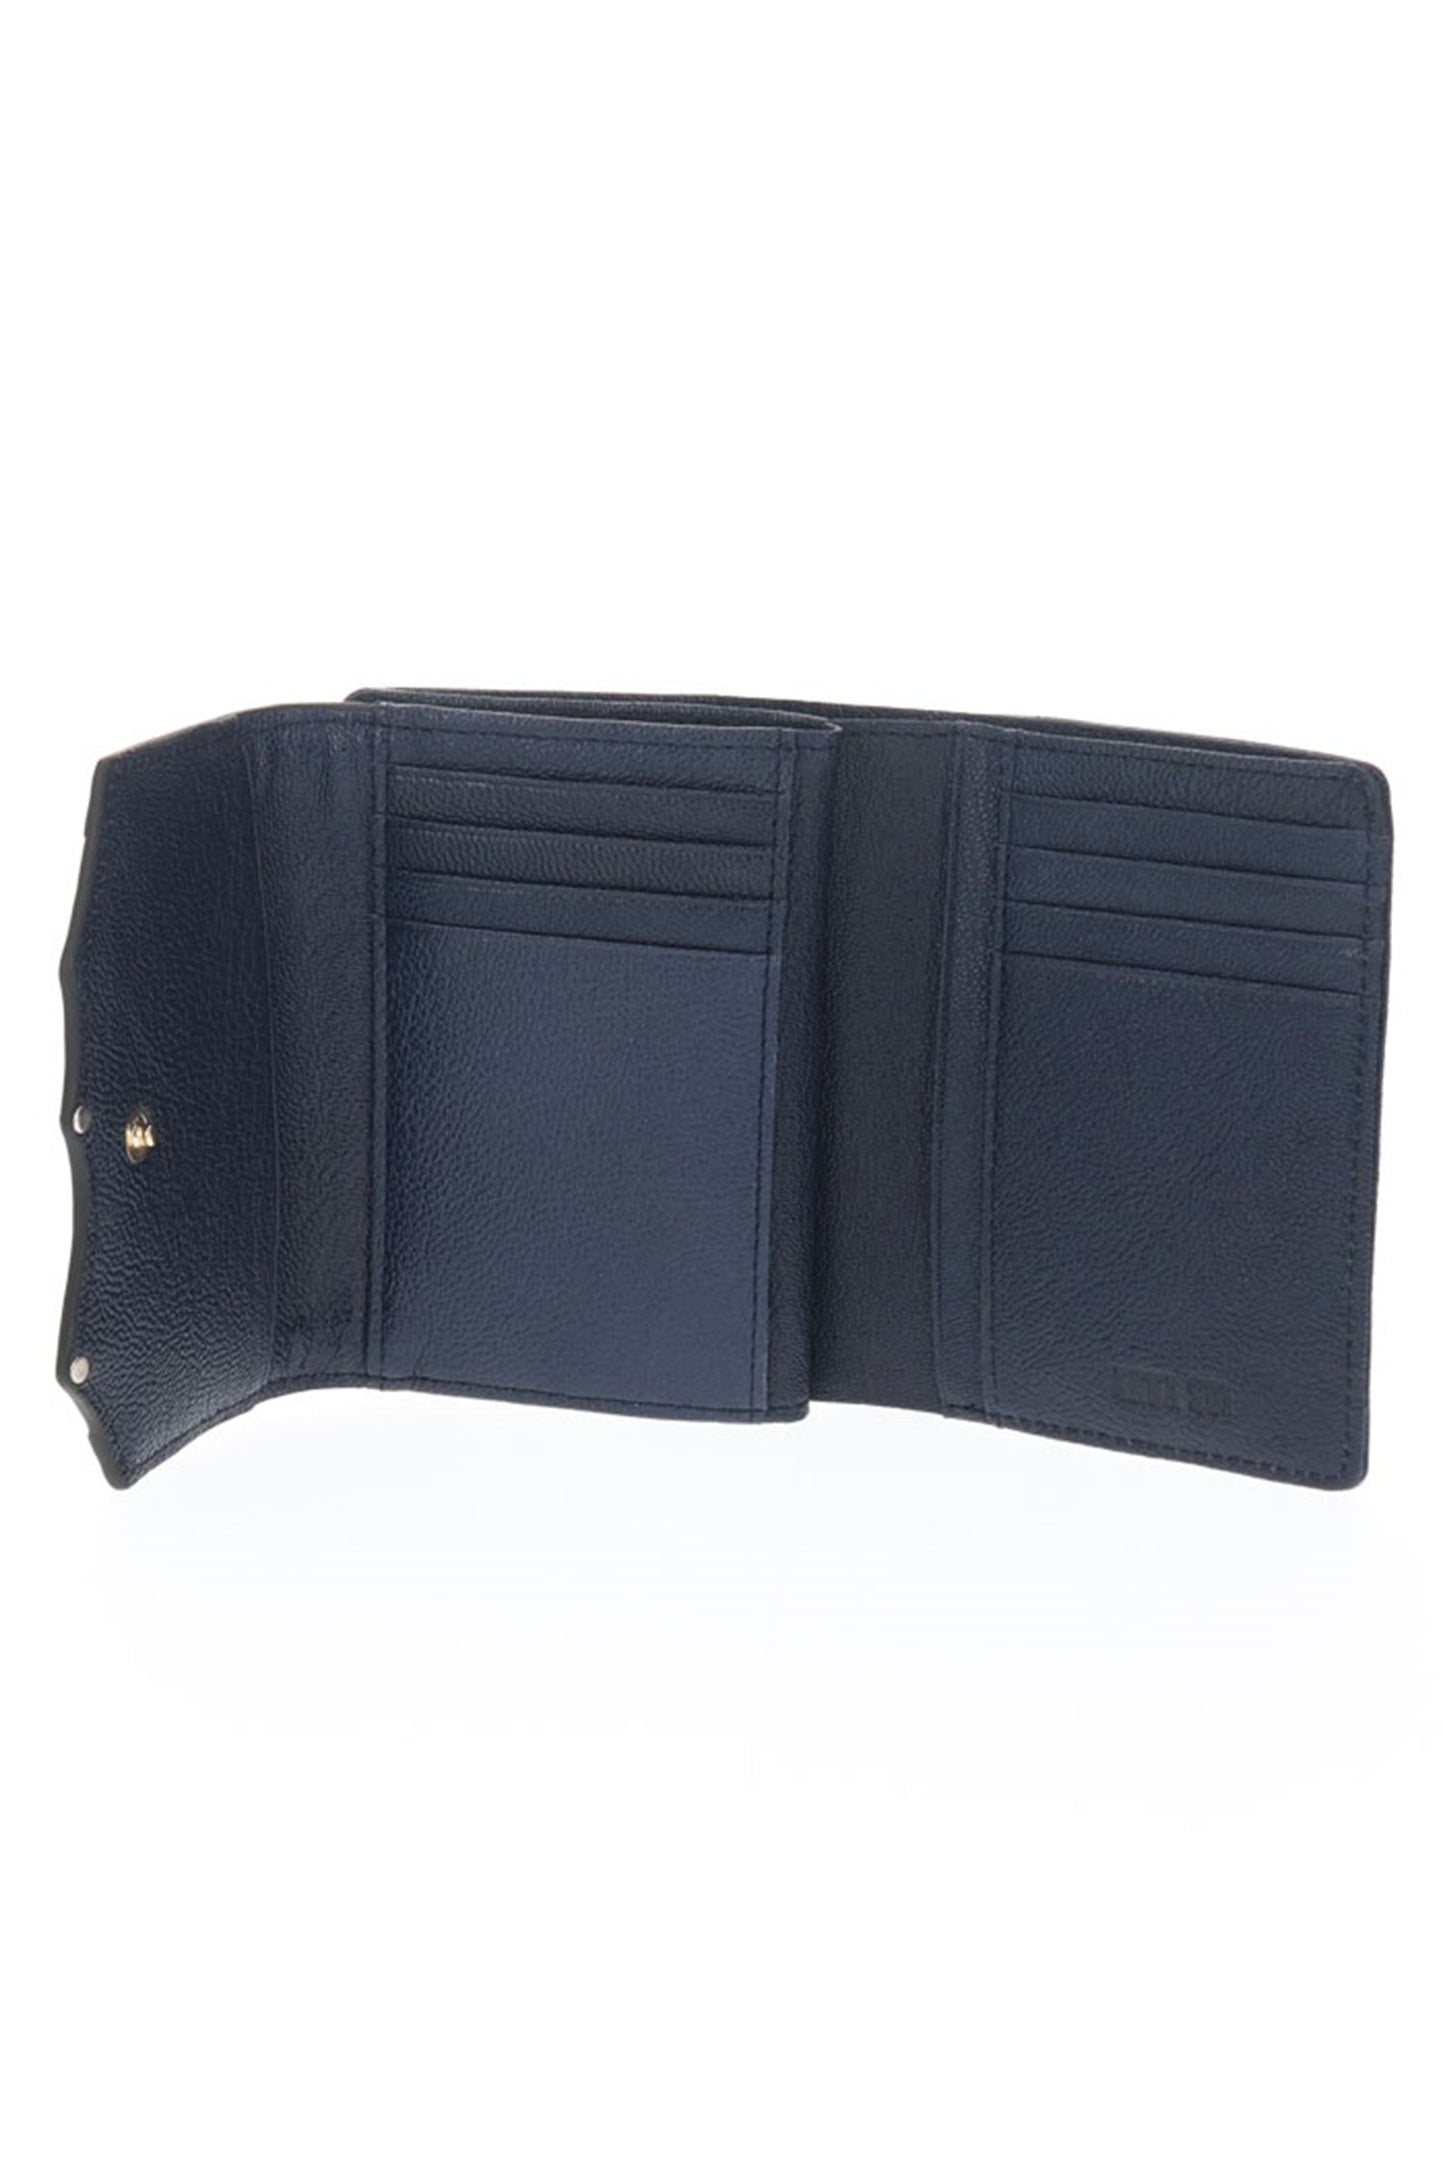 Open, Poison Clasp Bi-fold Wallet Navy reveals two compartments with four slots for credit cards.